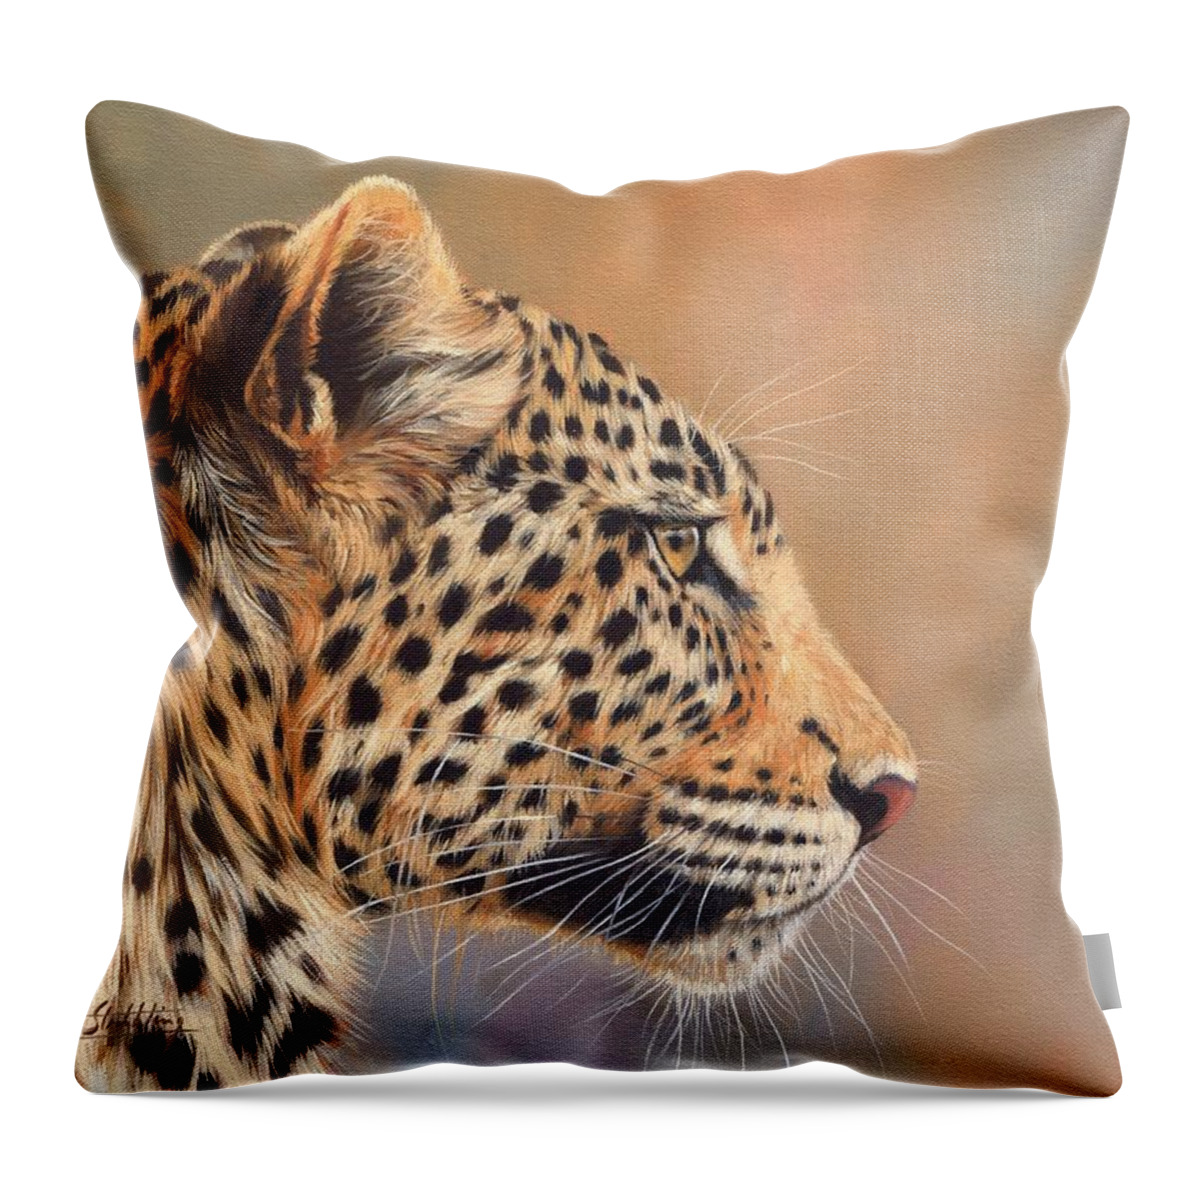 Leopard Throw Pillow featuring the painting Leopard #4 by David Stribbling